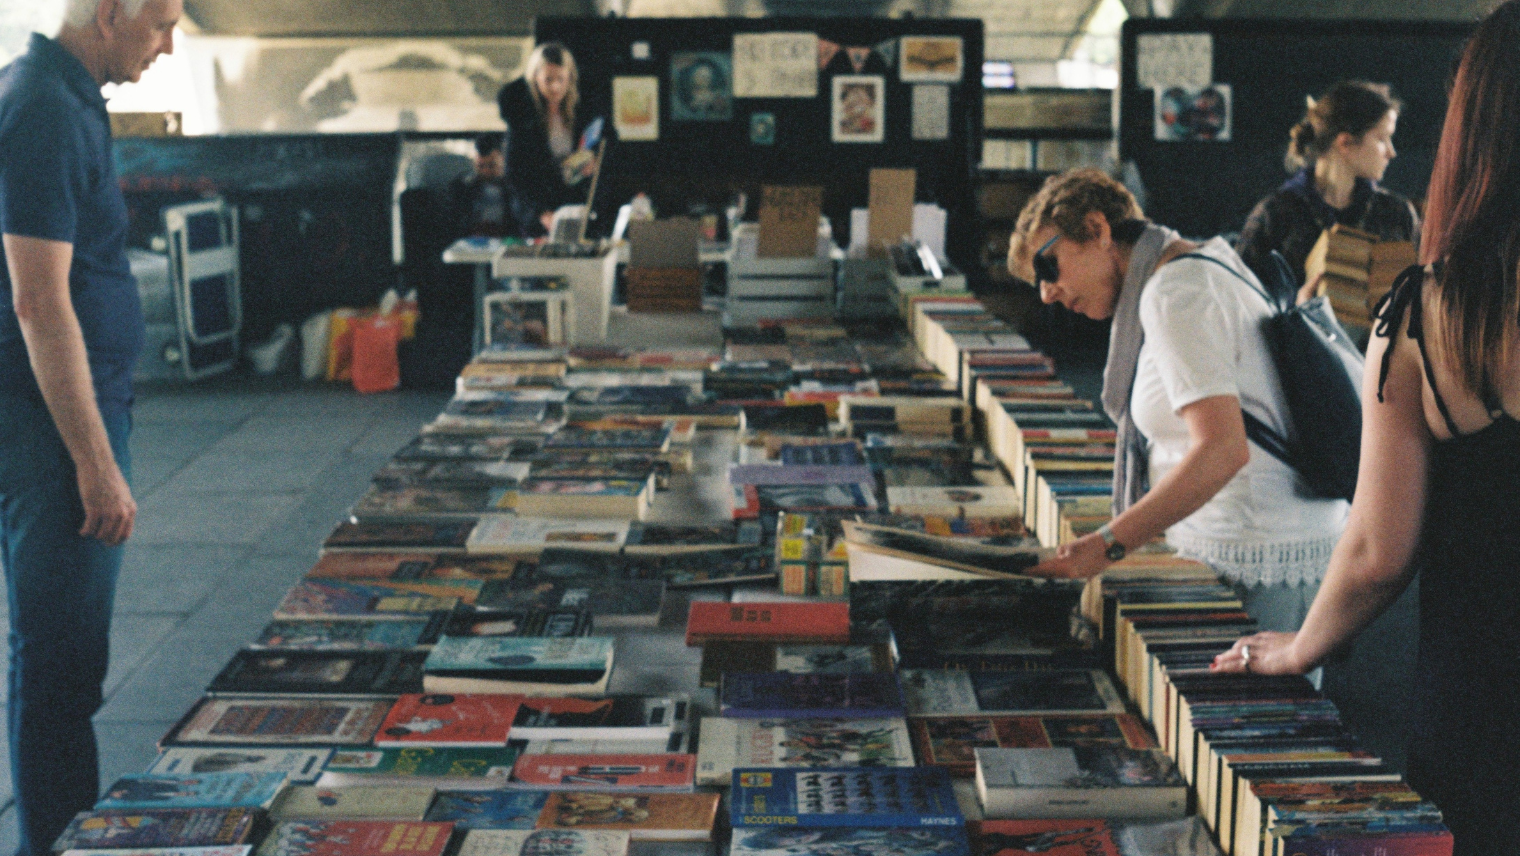 Image of people looking at books at a book market